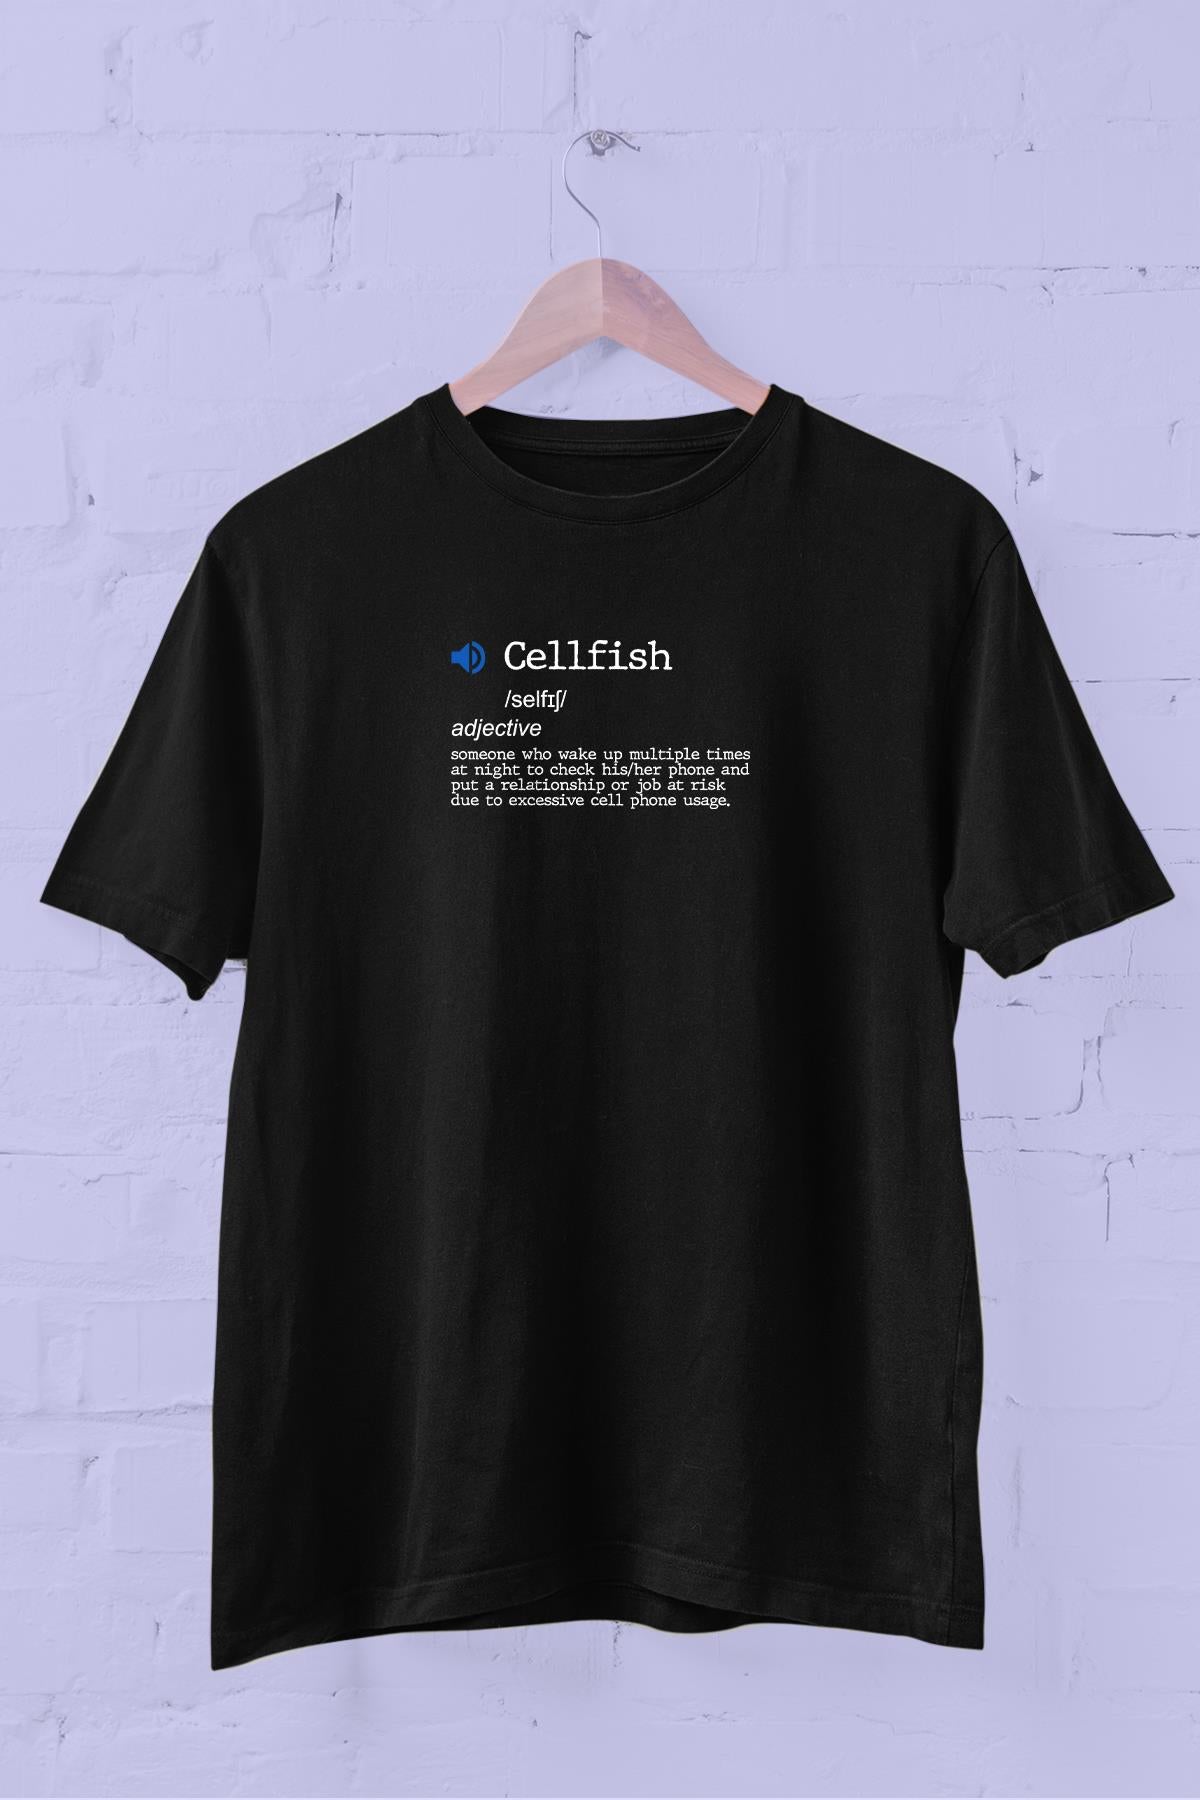 Fixed Words Dictionary "Cellfish" printed Crew Neck men's t -shirt